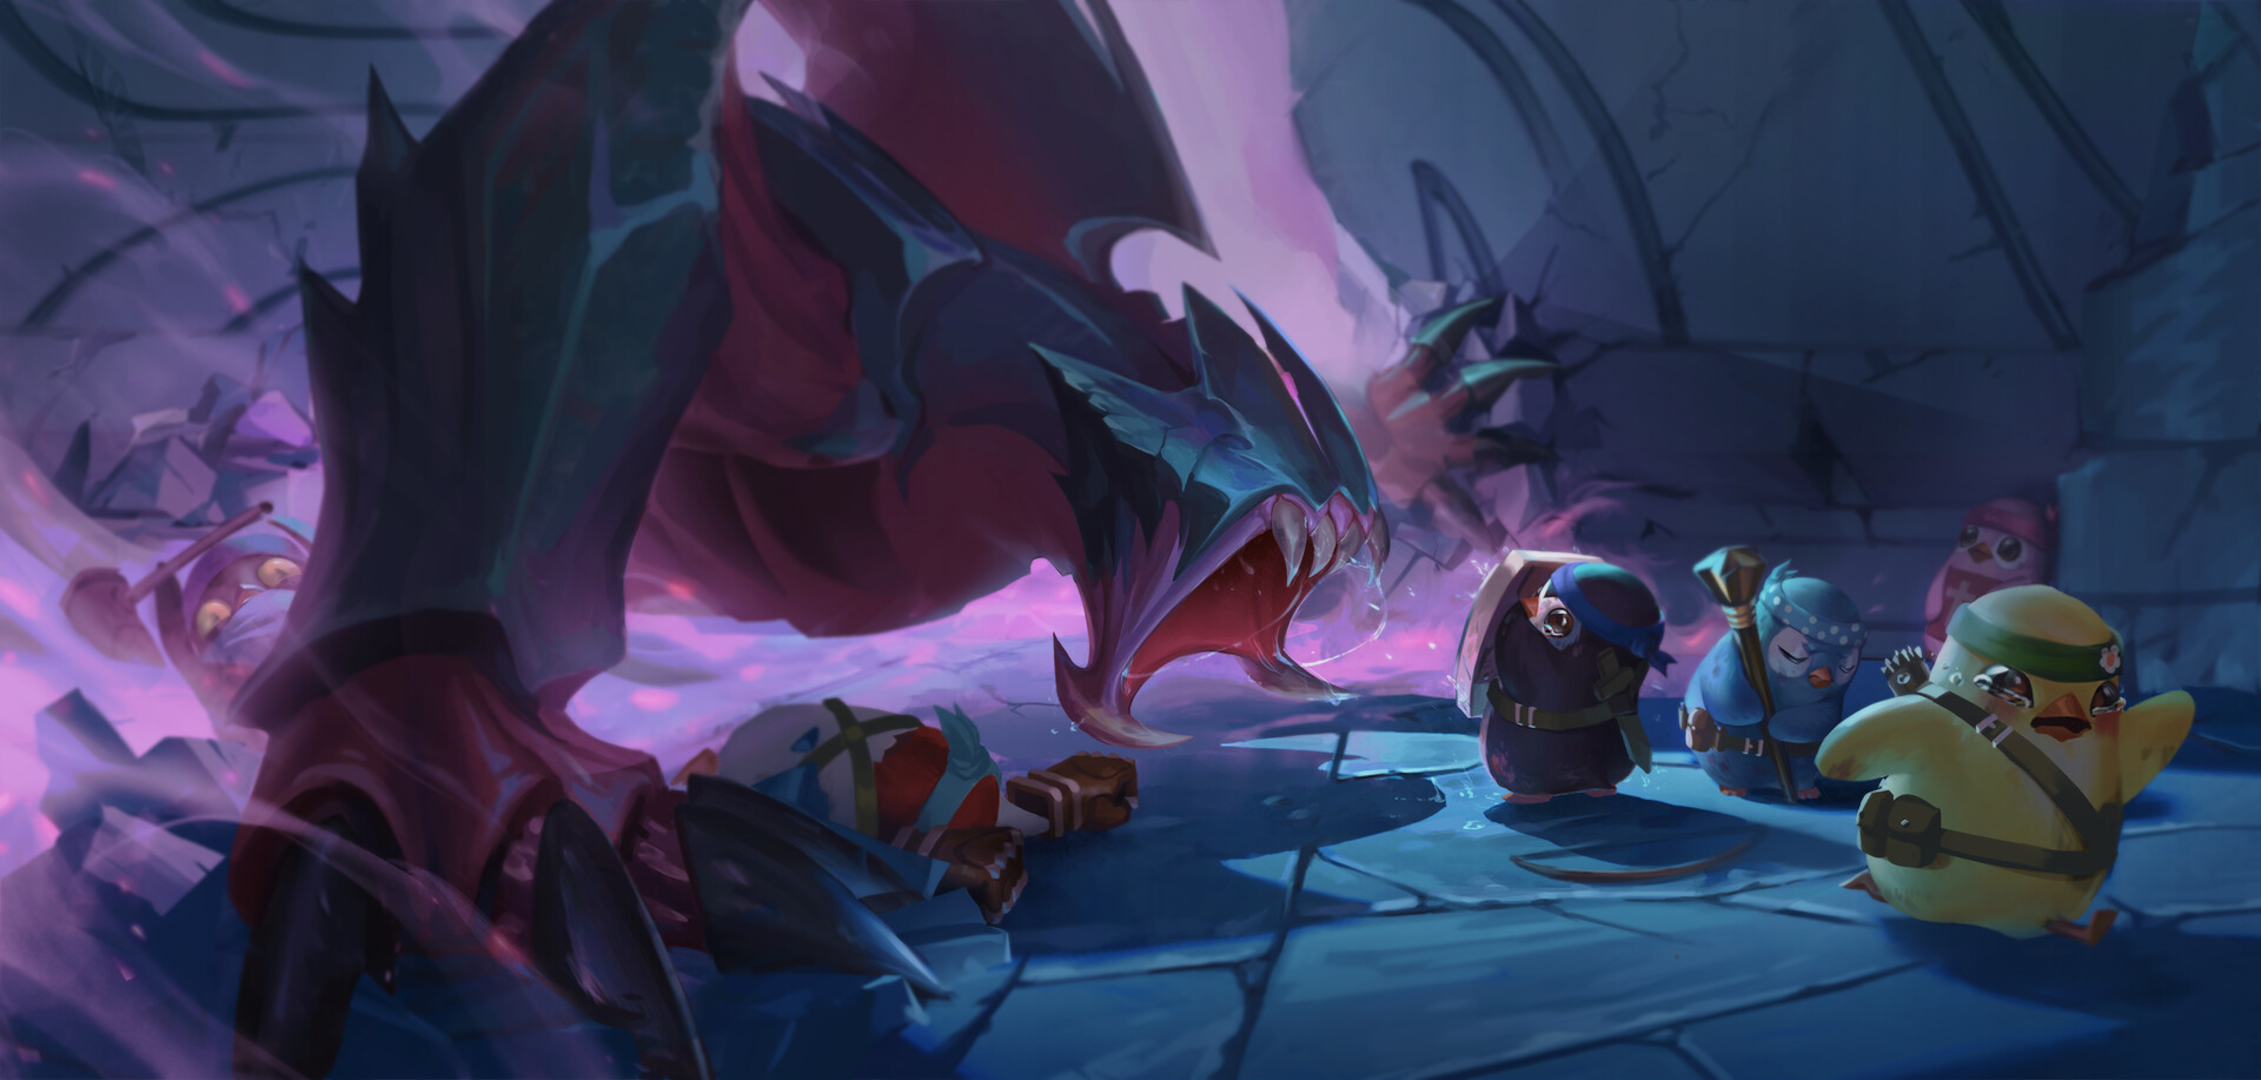 Dungeon time with Rek'sai by Hang Luo